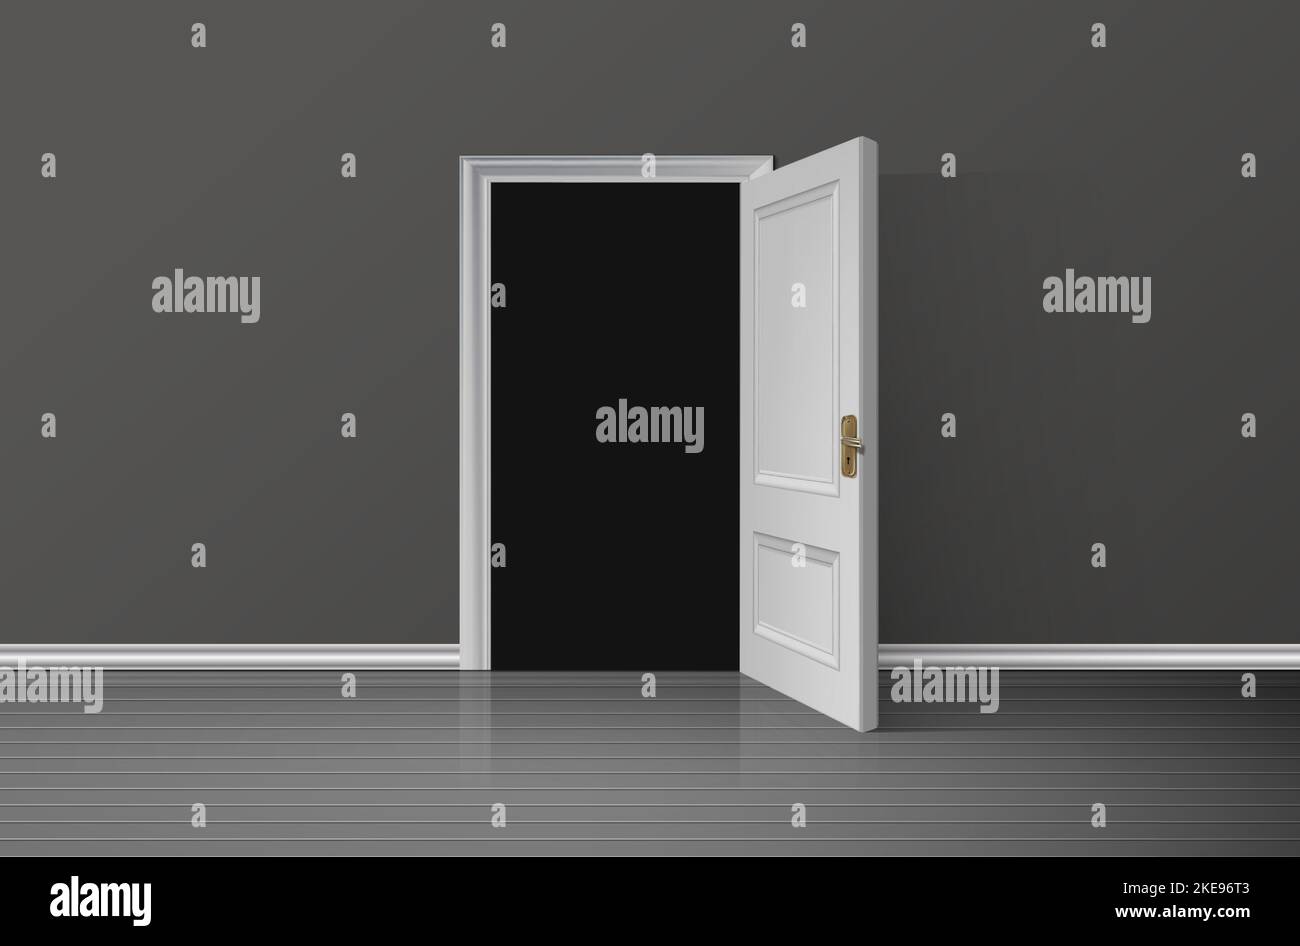 realistic vector illustration background. Open white wooden door with darkness inside the room. Stock Vector